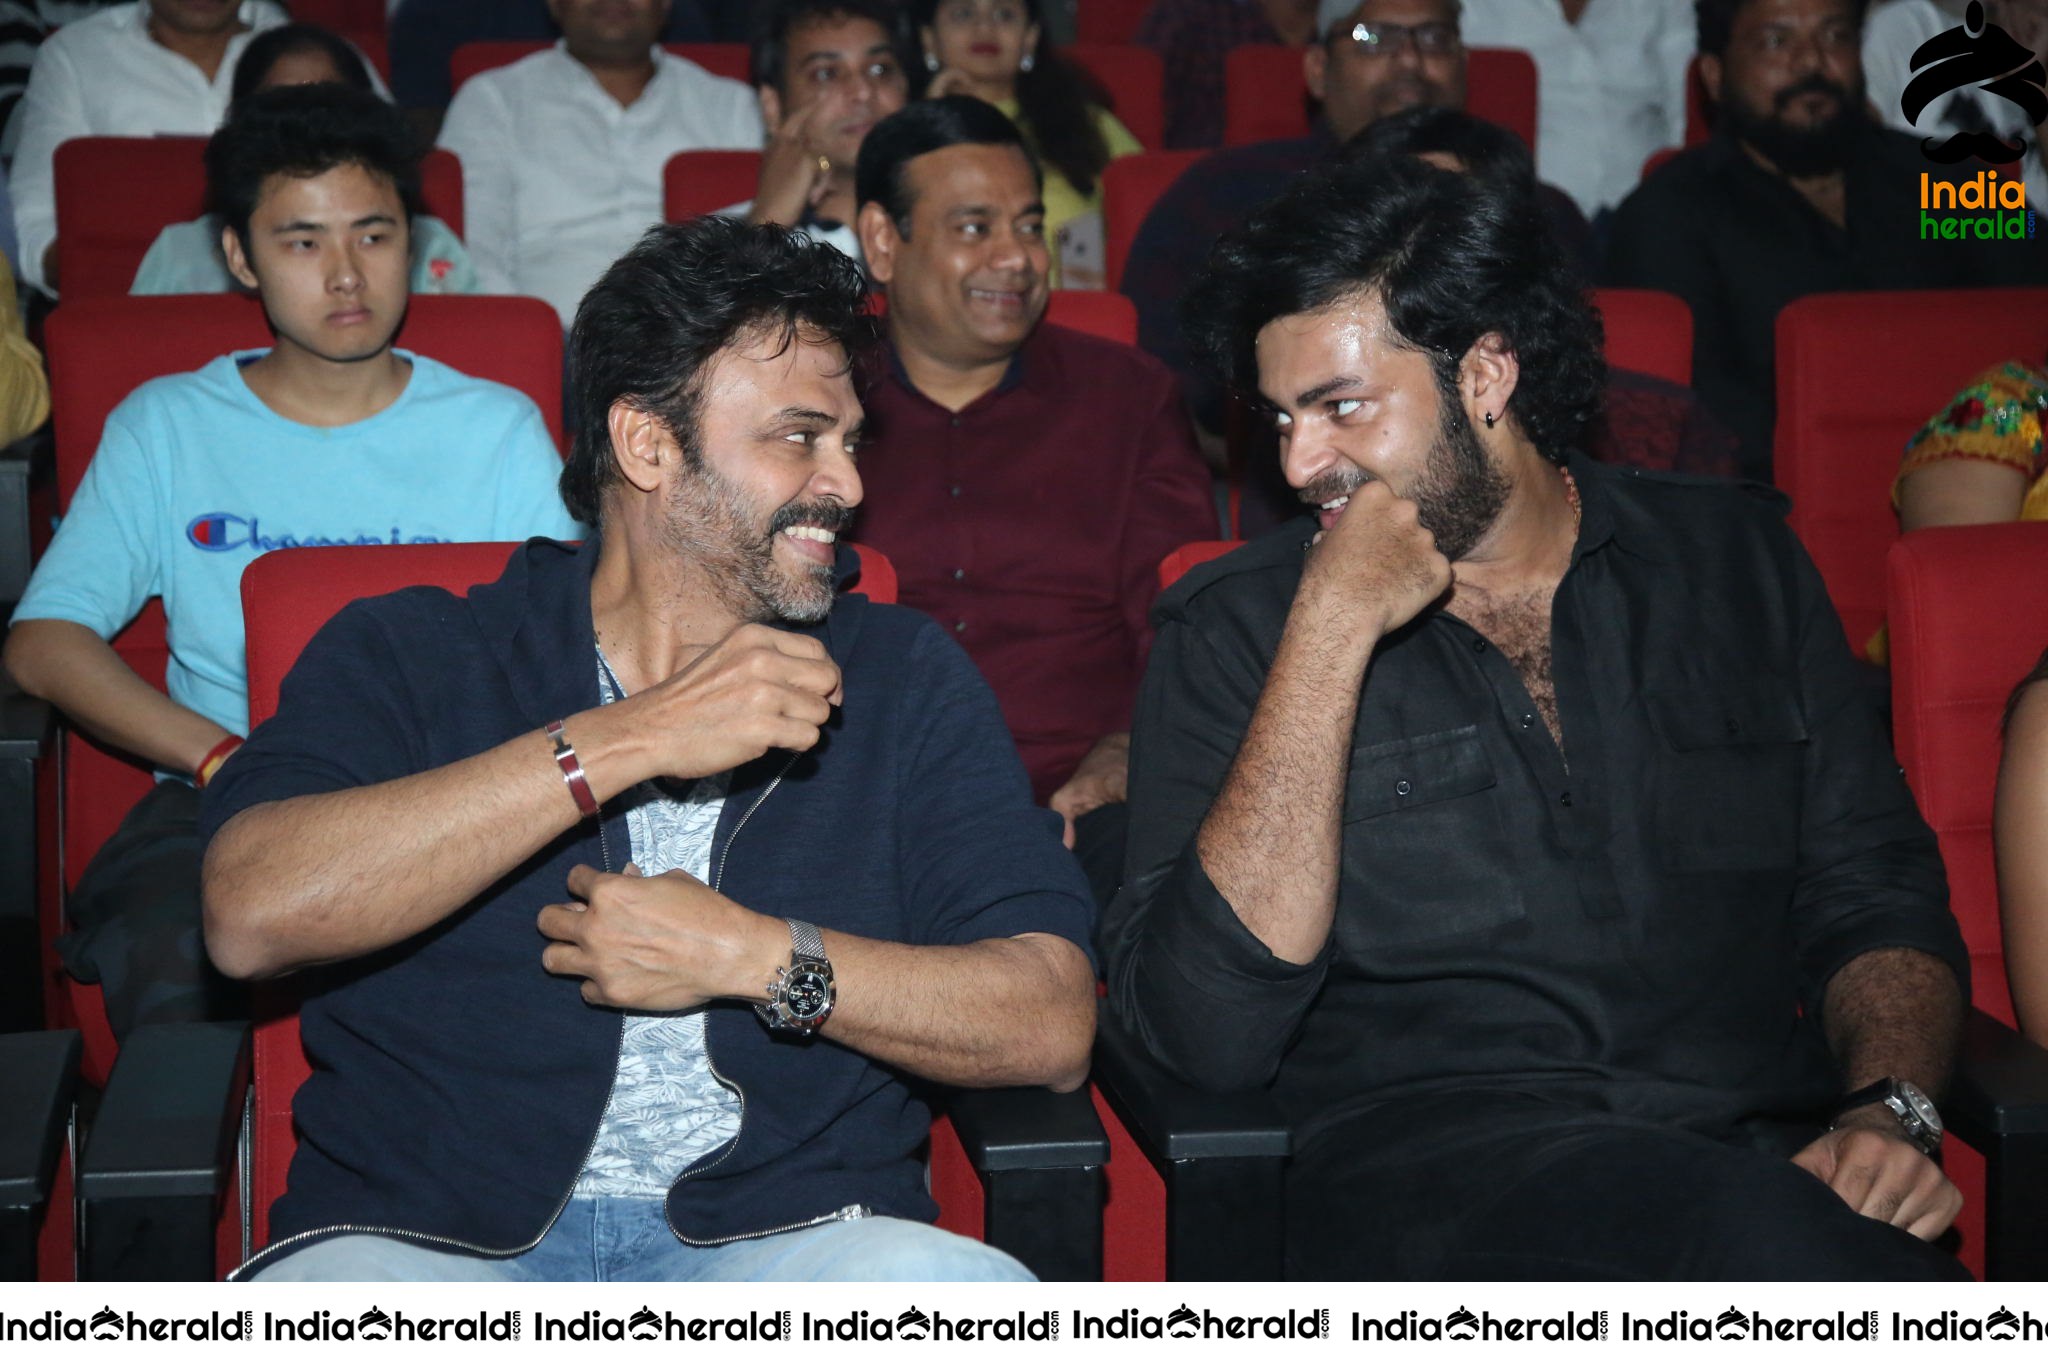 Victory Venkatesh And Varun Tej Spotted Chatting At the Event